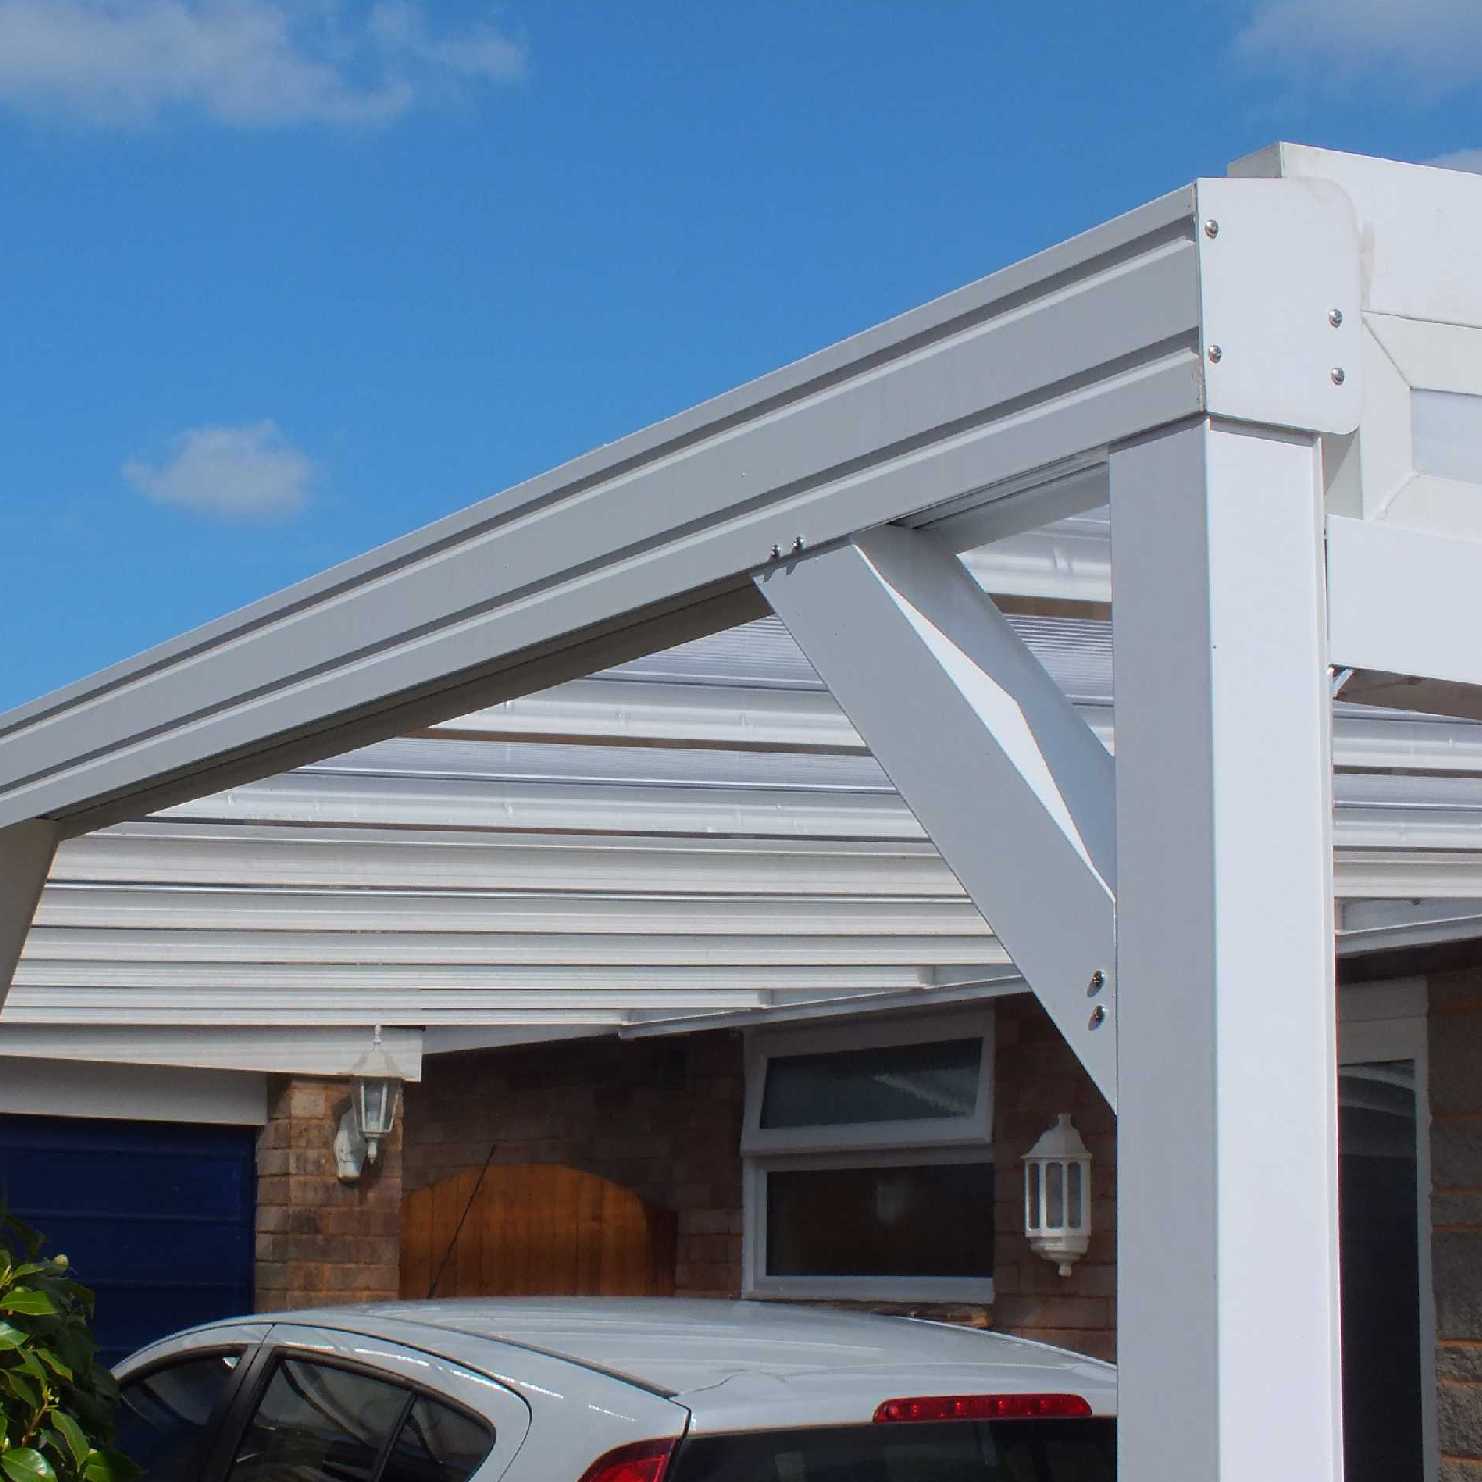 Great deals on Omega Smart Lean-To Canopy, White with 16mm Polycarbonate Glazing - 11.4m (W) x 3.5m (P), (5) Supporting Posts